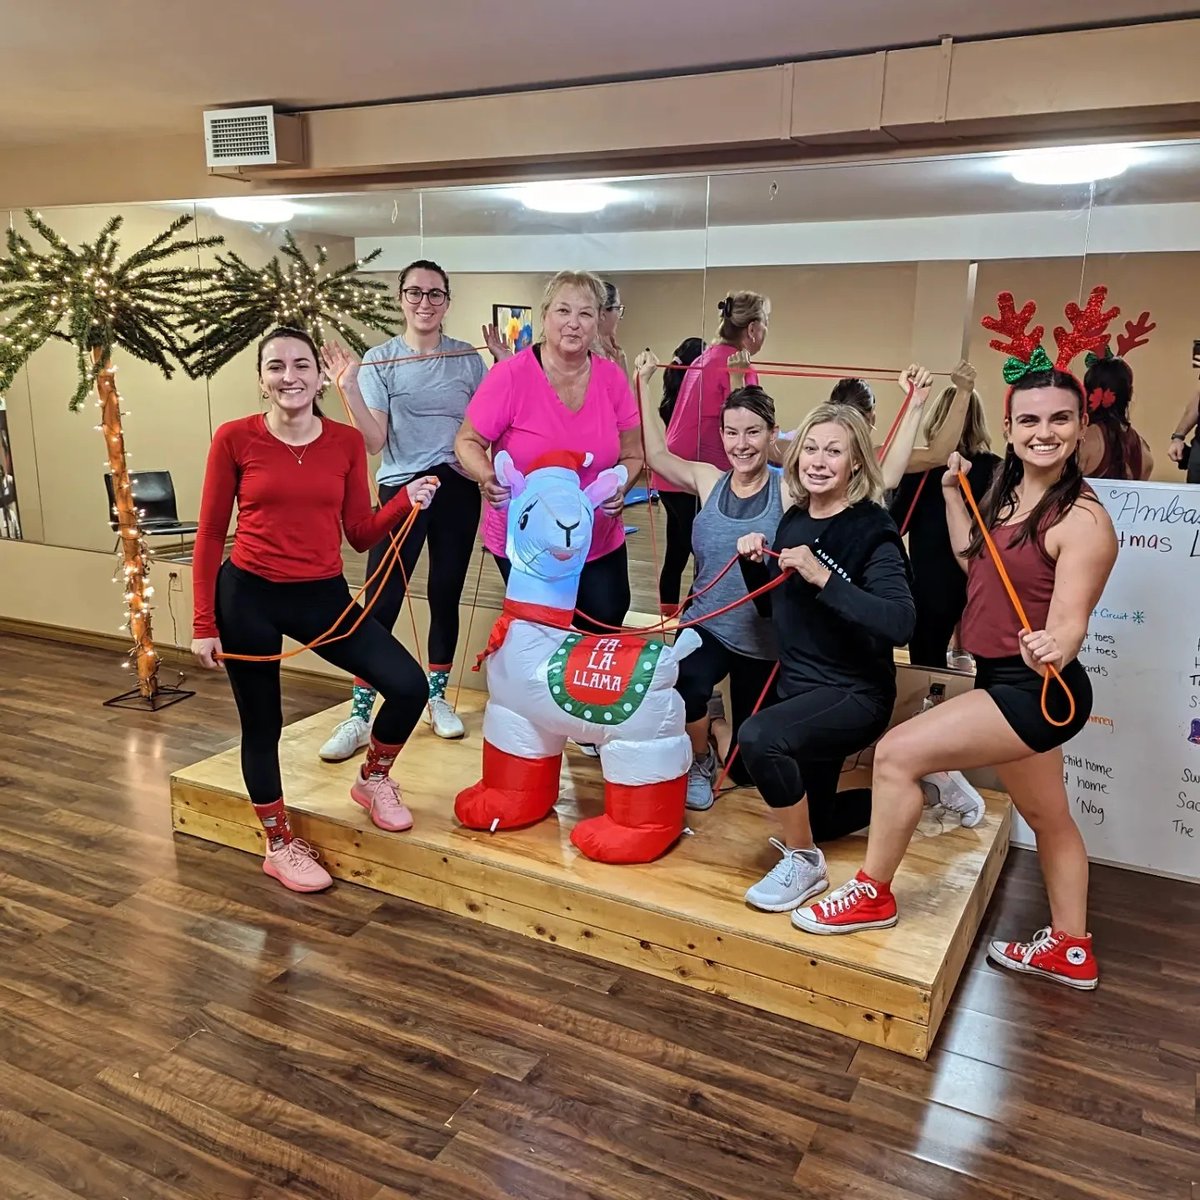 🎉Congratulations to Ambassador Fitness & Performance on celebrating 1 year of strength, sweat, and success! Check out this year of unforgettable moments, including their grand opening, special events, and Christmas party! Wishing you the best for many more years to come. 🌟🍰